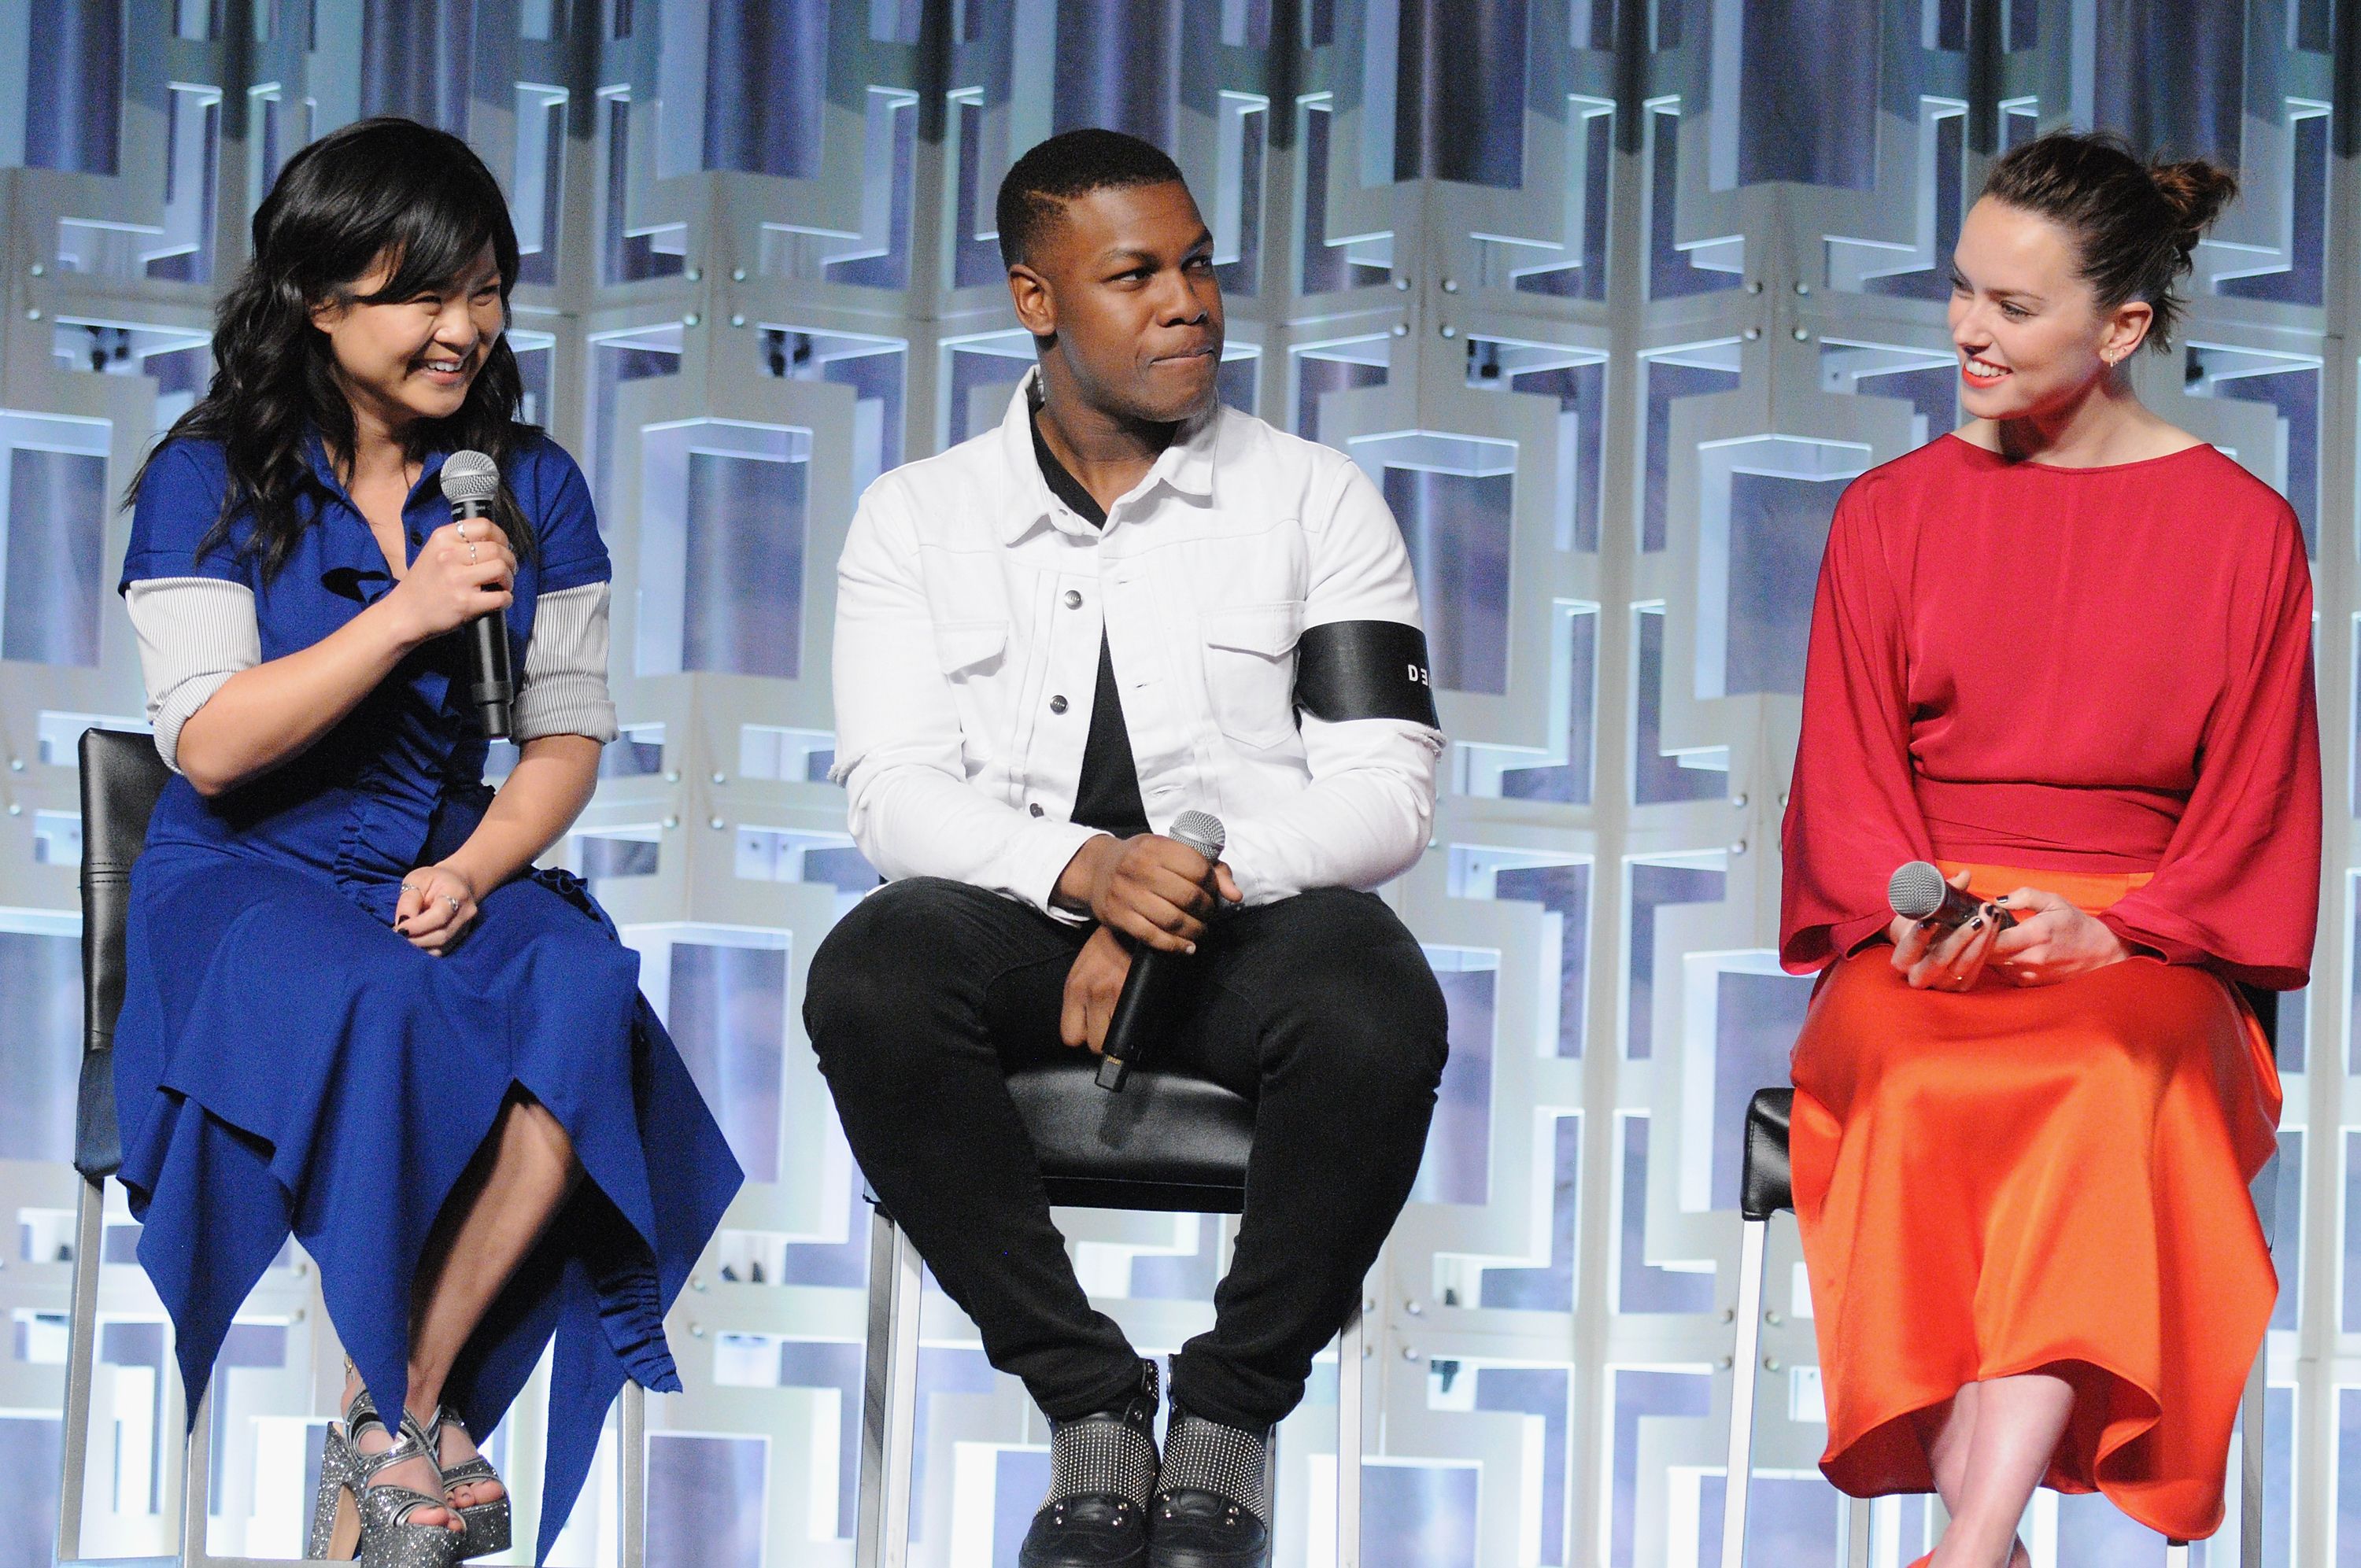 Star Wars Celebration Coverage: Recaps, Reviews, and More | Collider